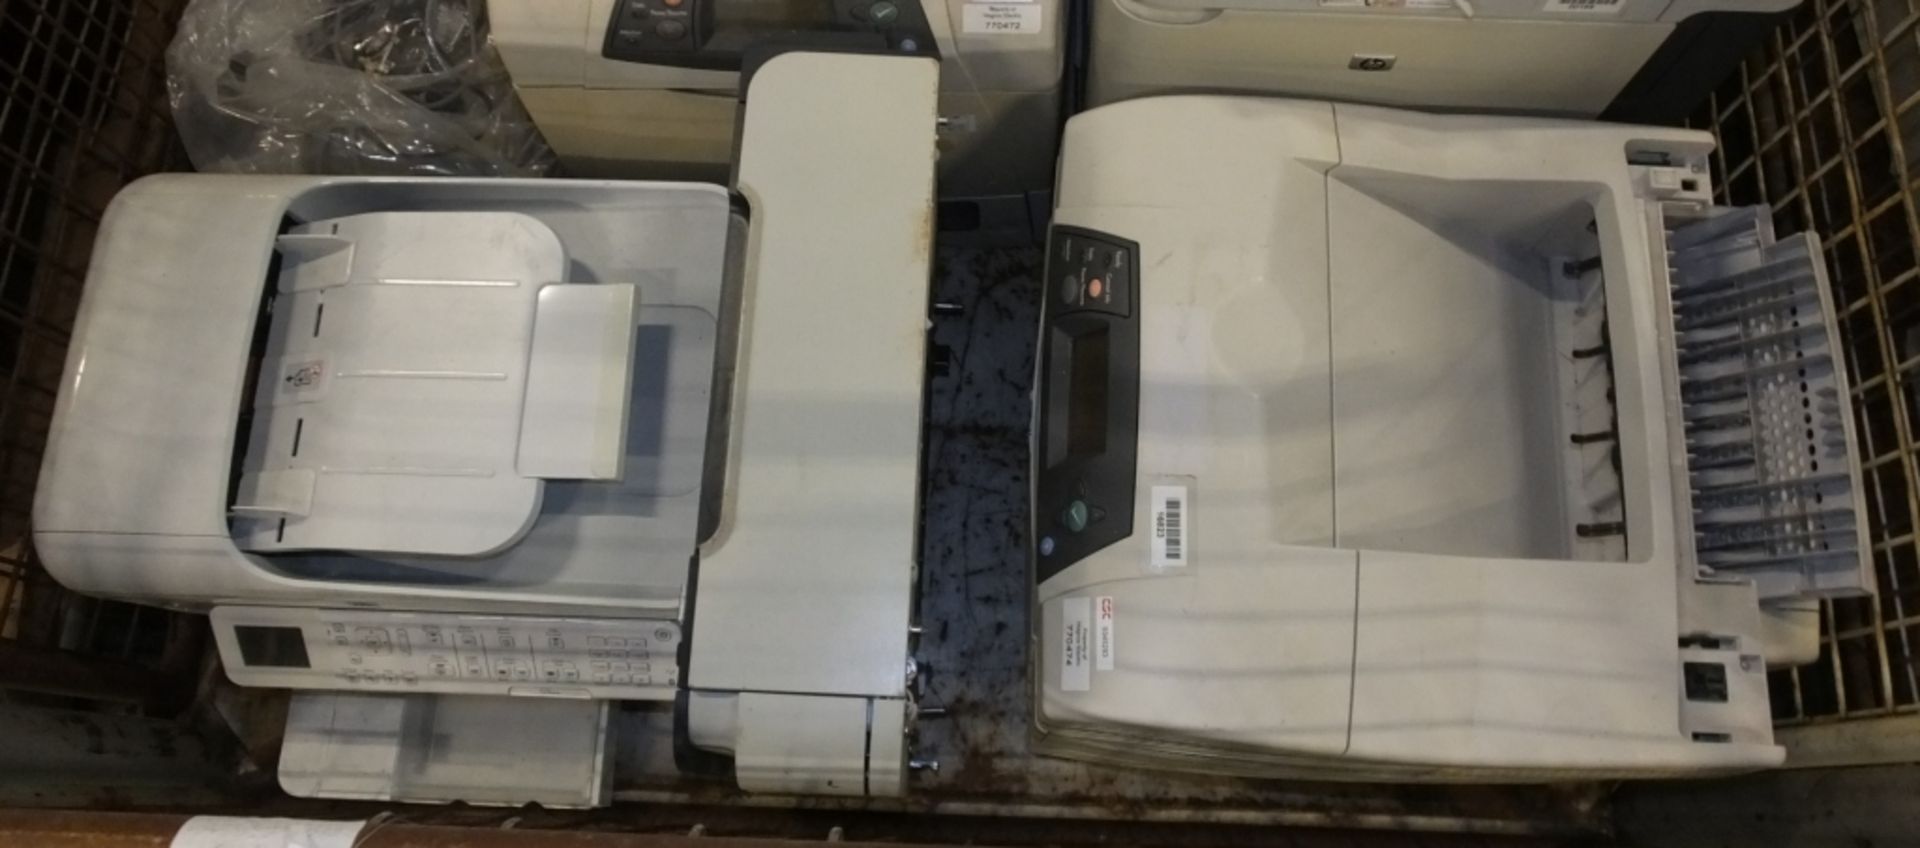 Office Equipment Printers & Fax Machines - Image 3 of 3